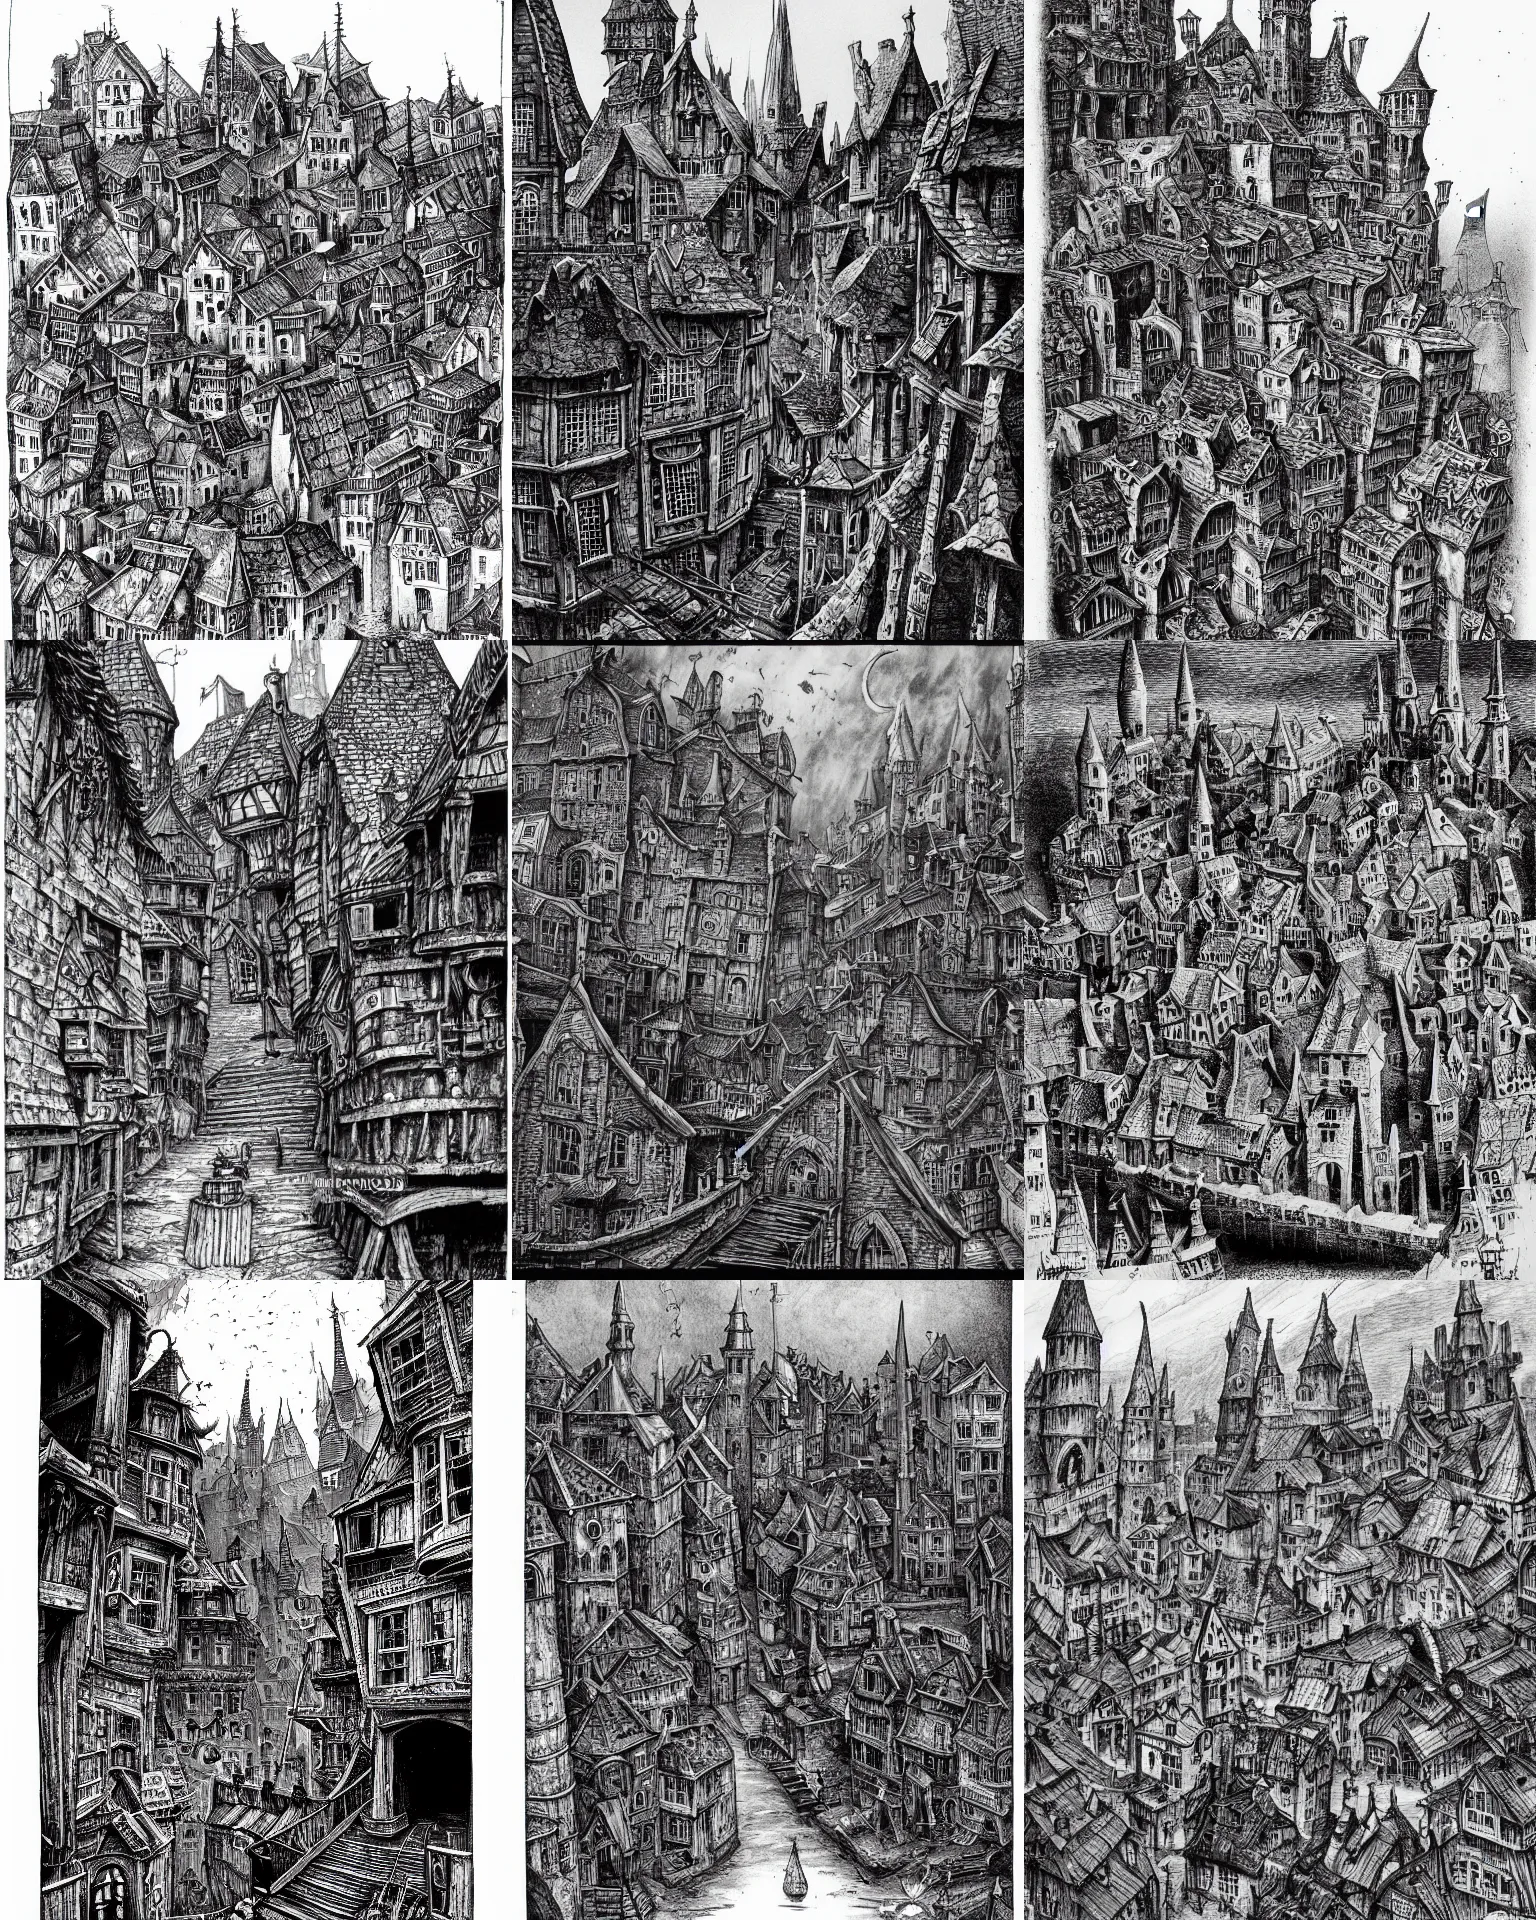 Prompt: a black and white illustration of mordheim, a surreal medieval city by john blanche, ian miller, alex boyd, highly detailed, ink on paper